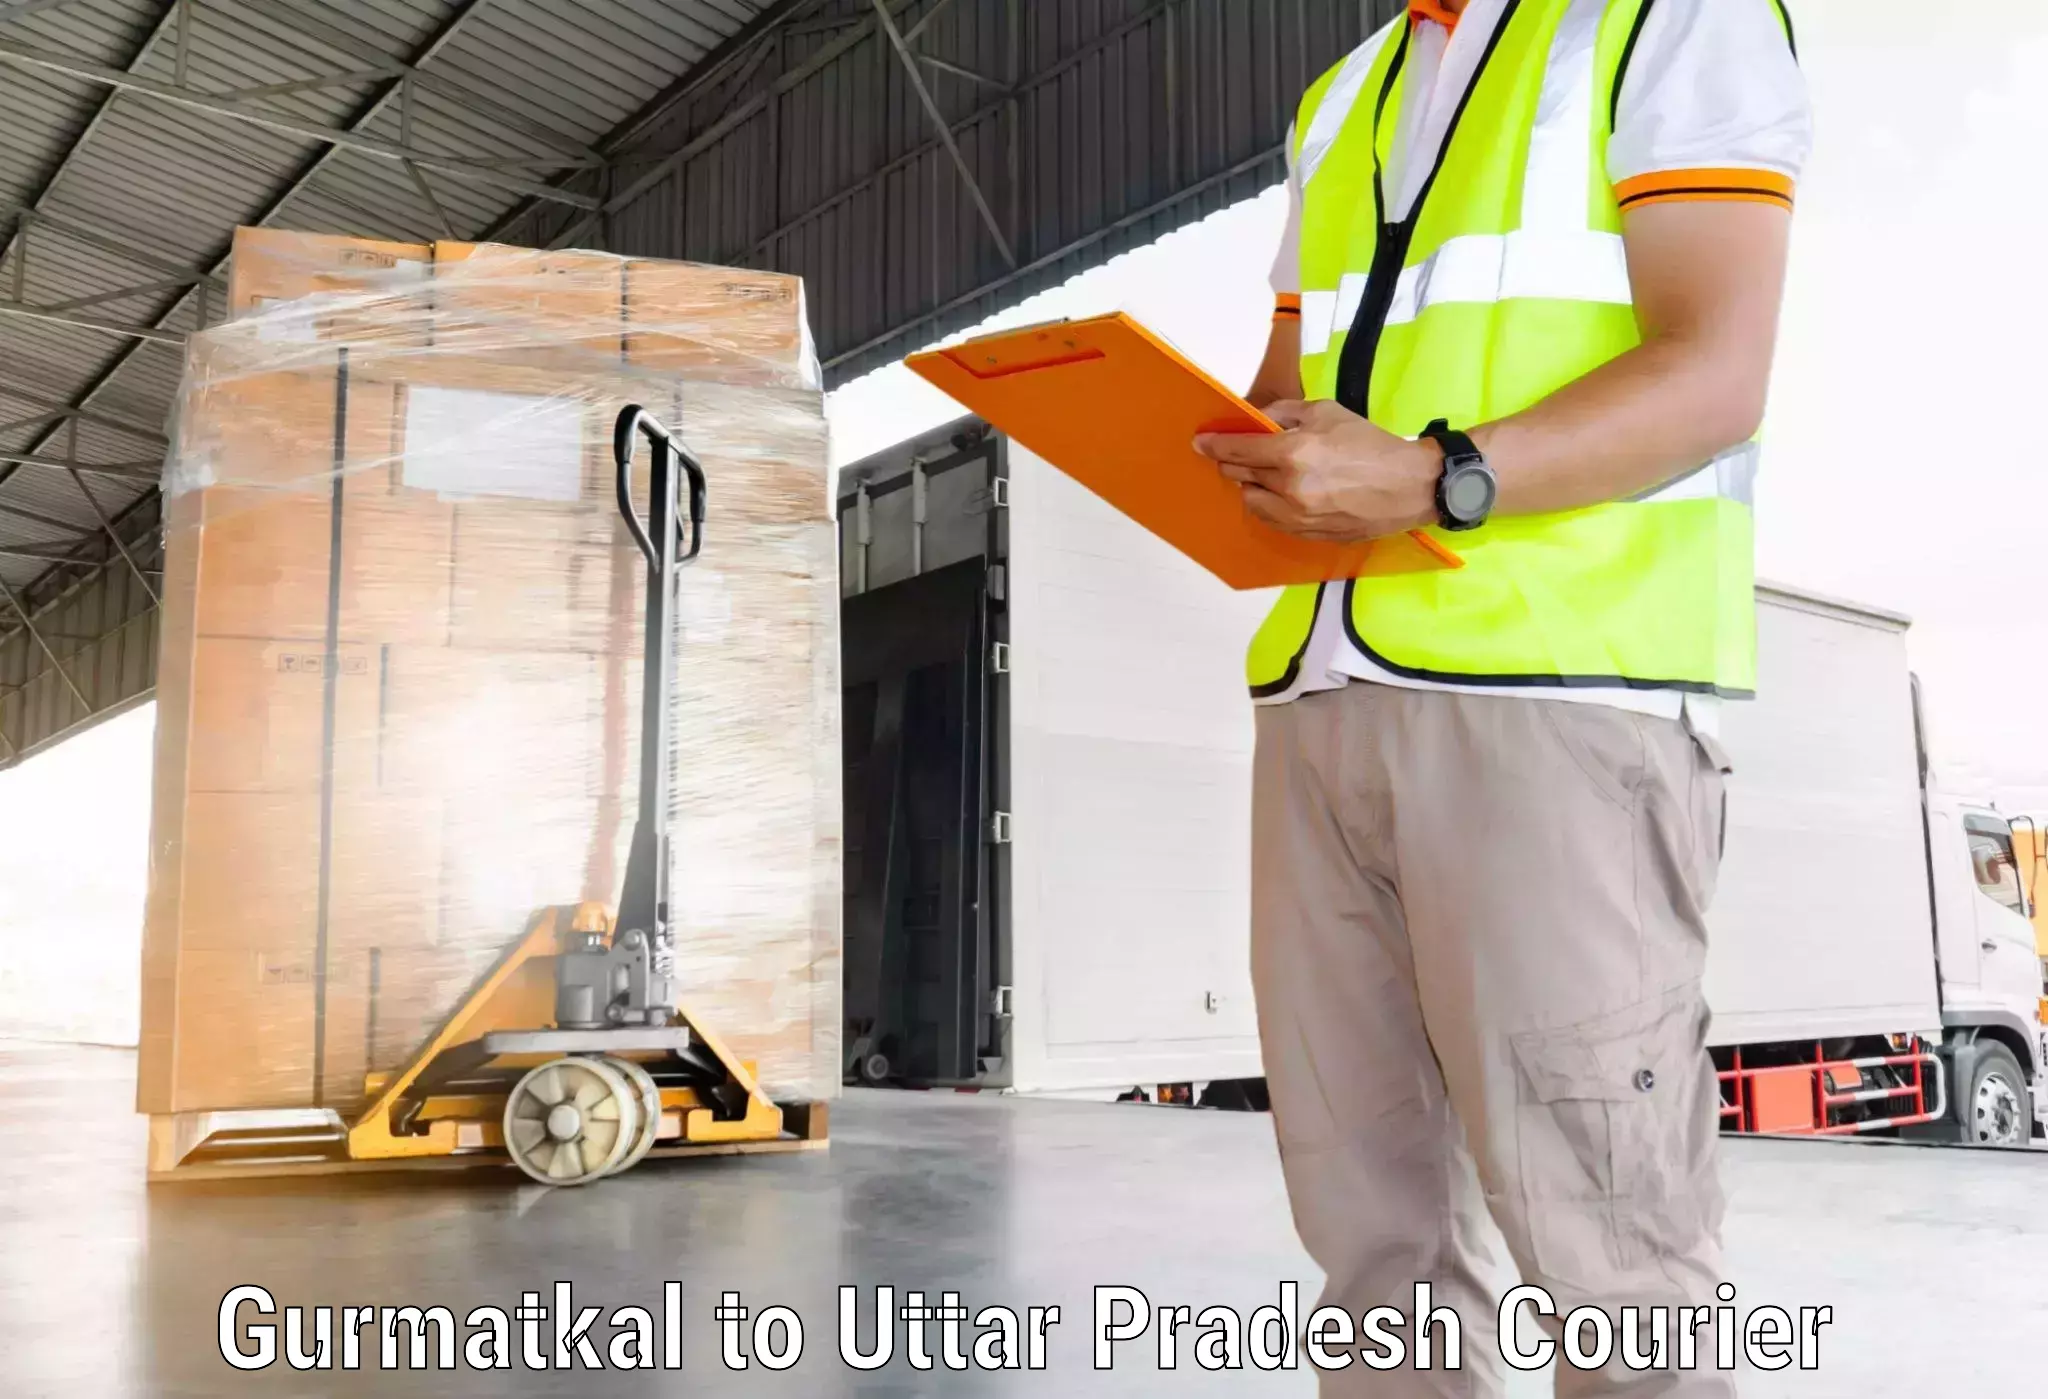 Pharmaceutical courier Gurmatkal to Rath